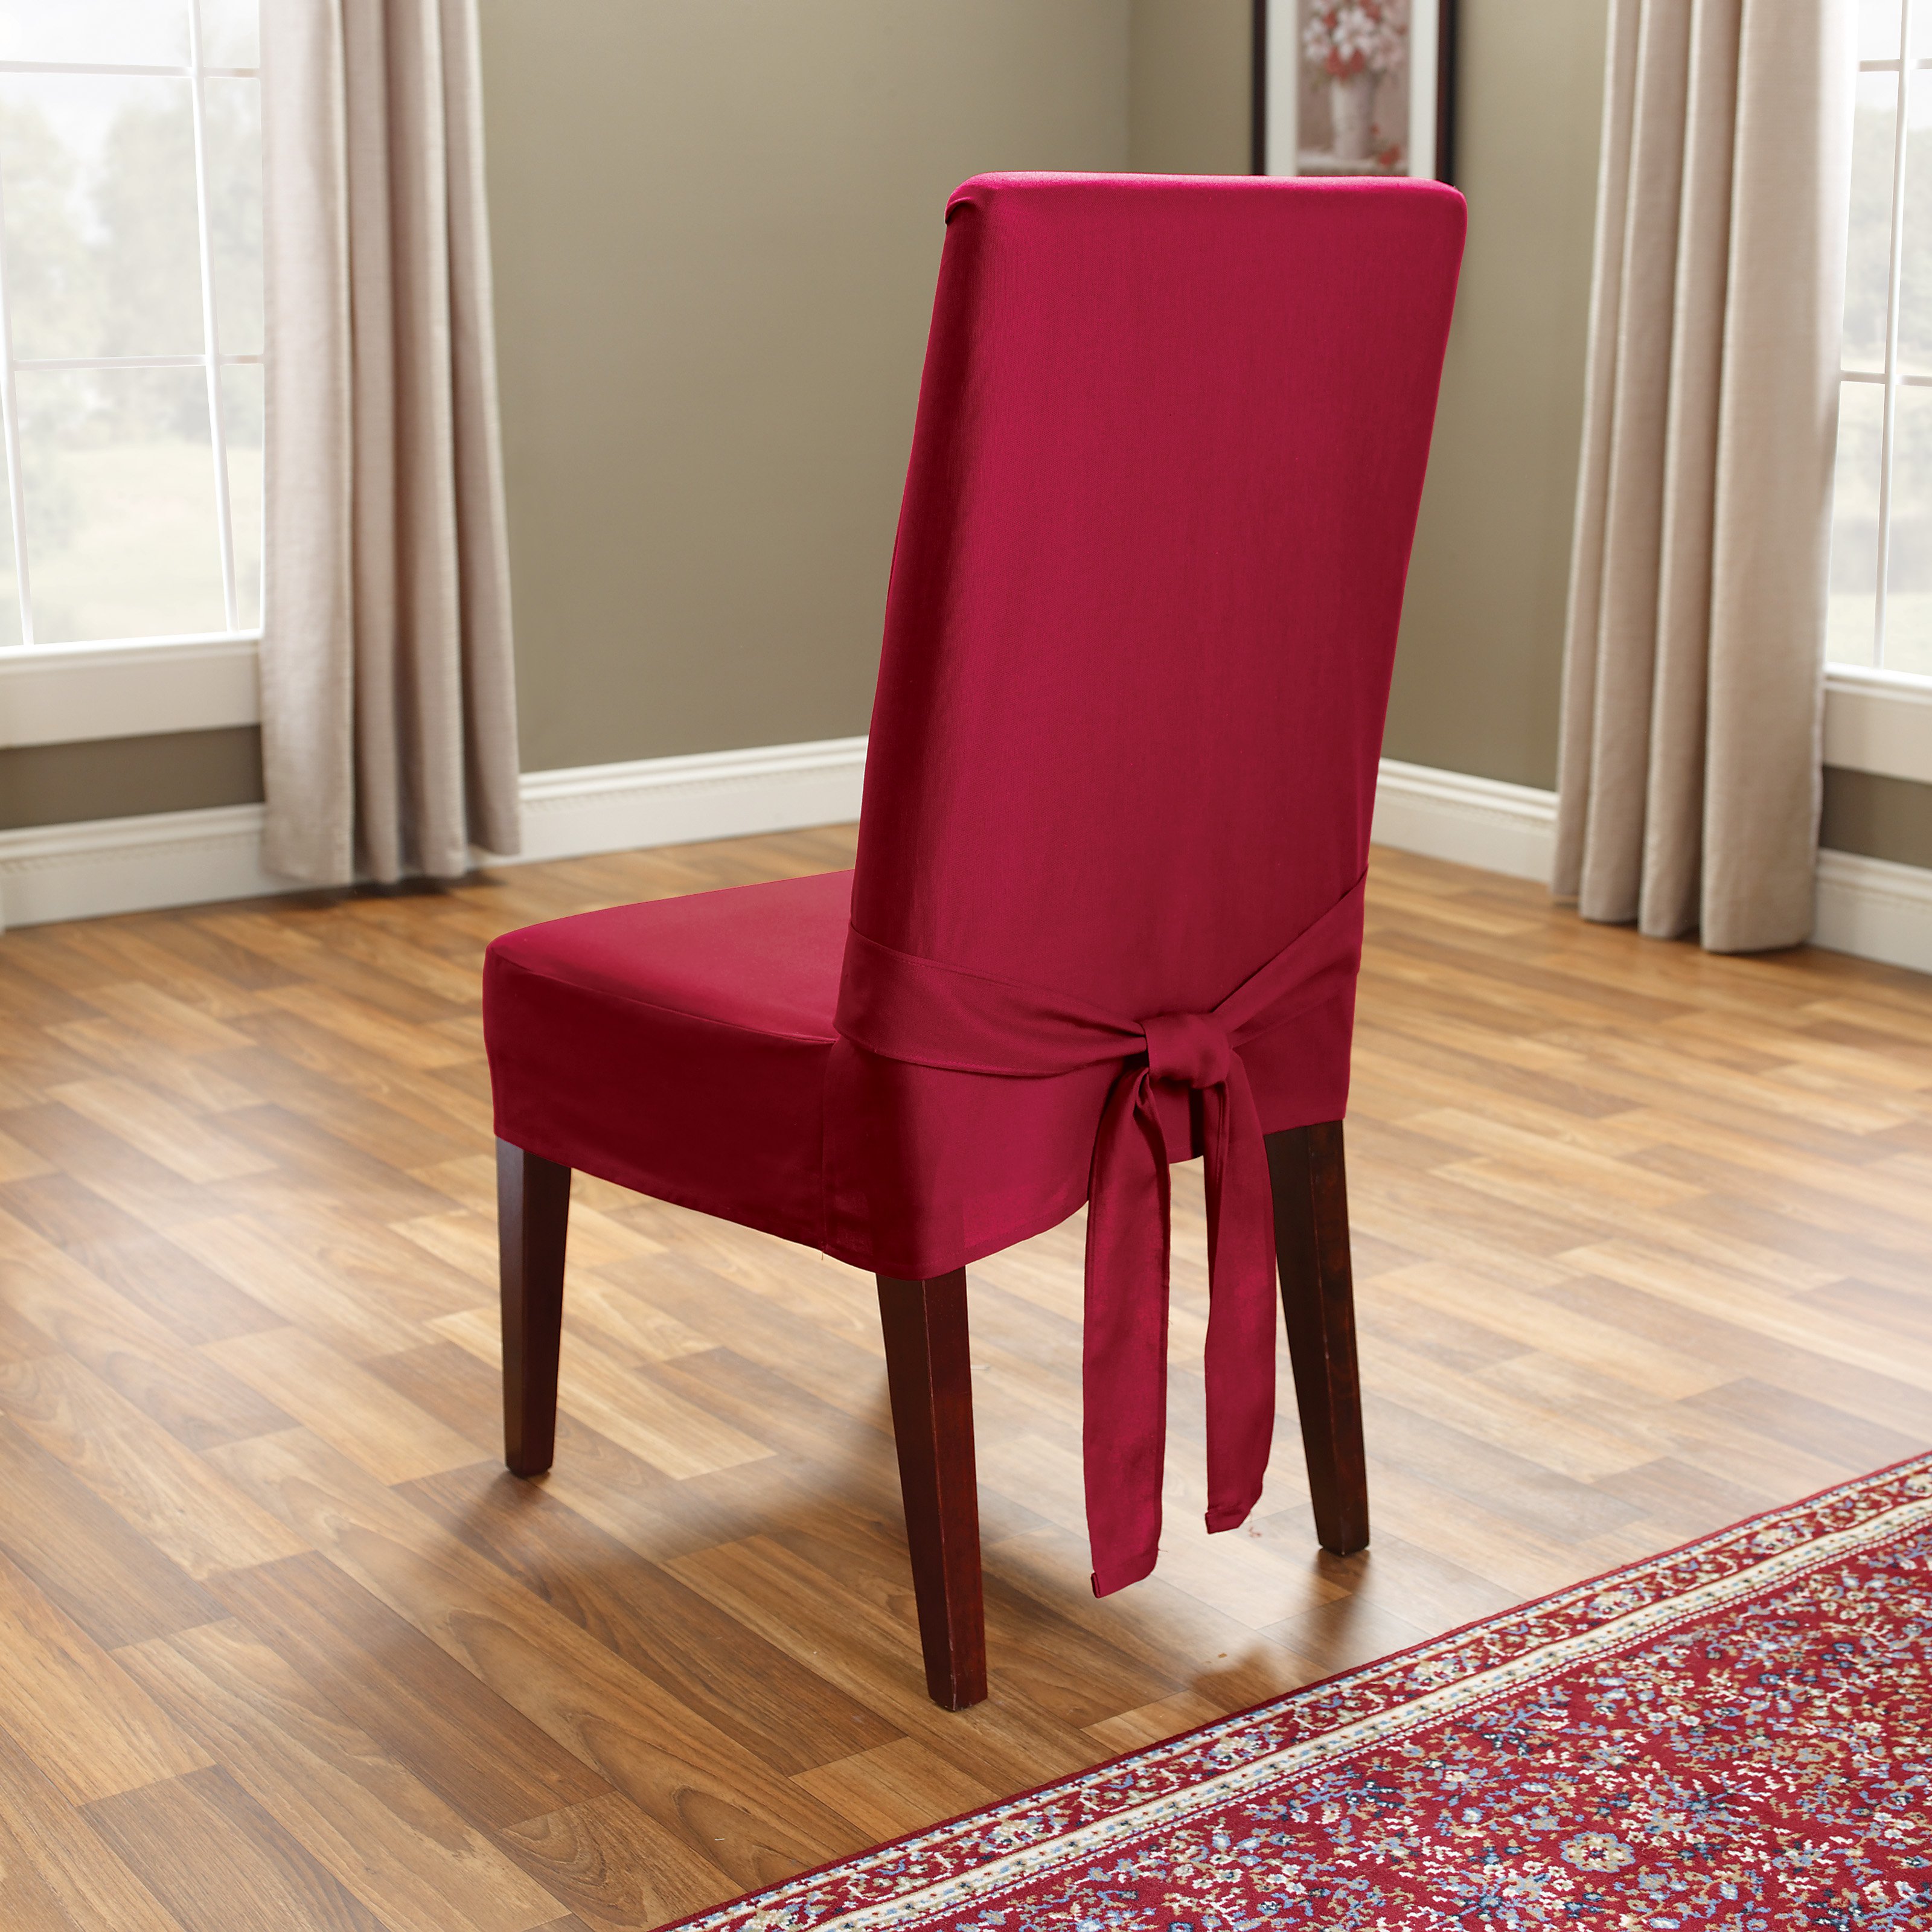 dining room chair back covers photo - 1